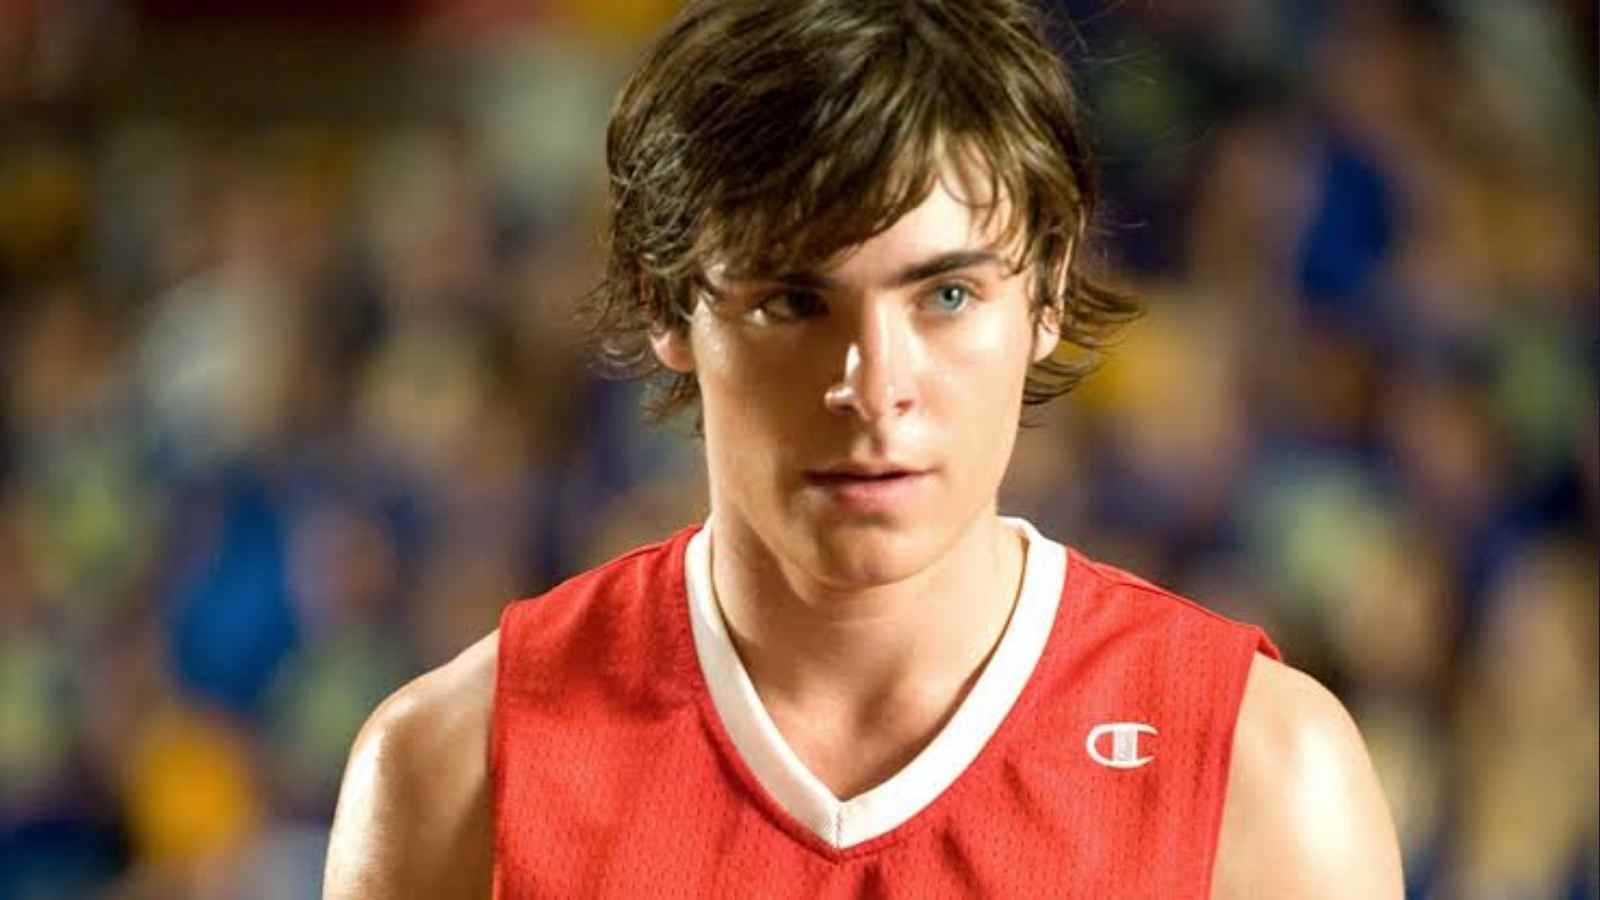 Zac Efron in the 'High School Musical'